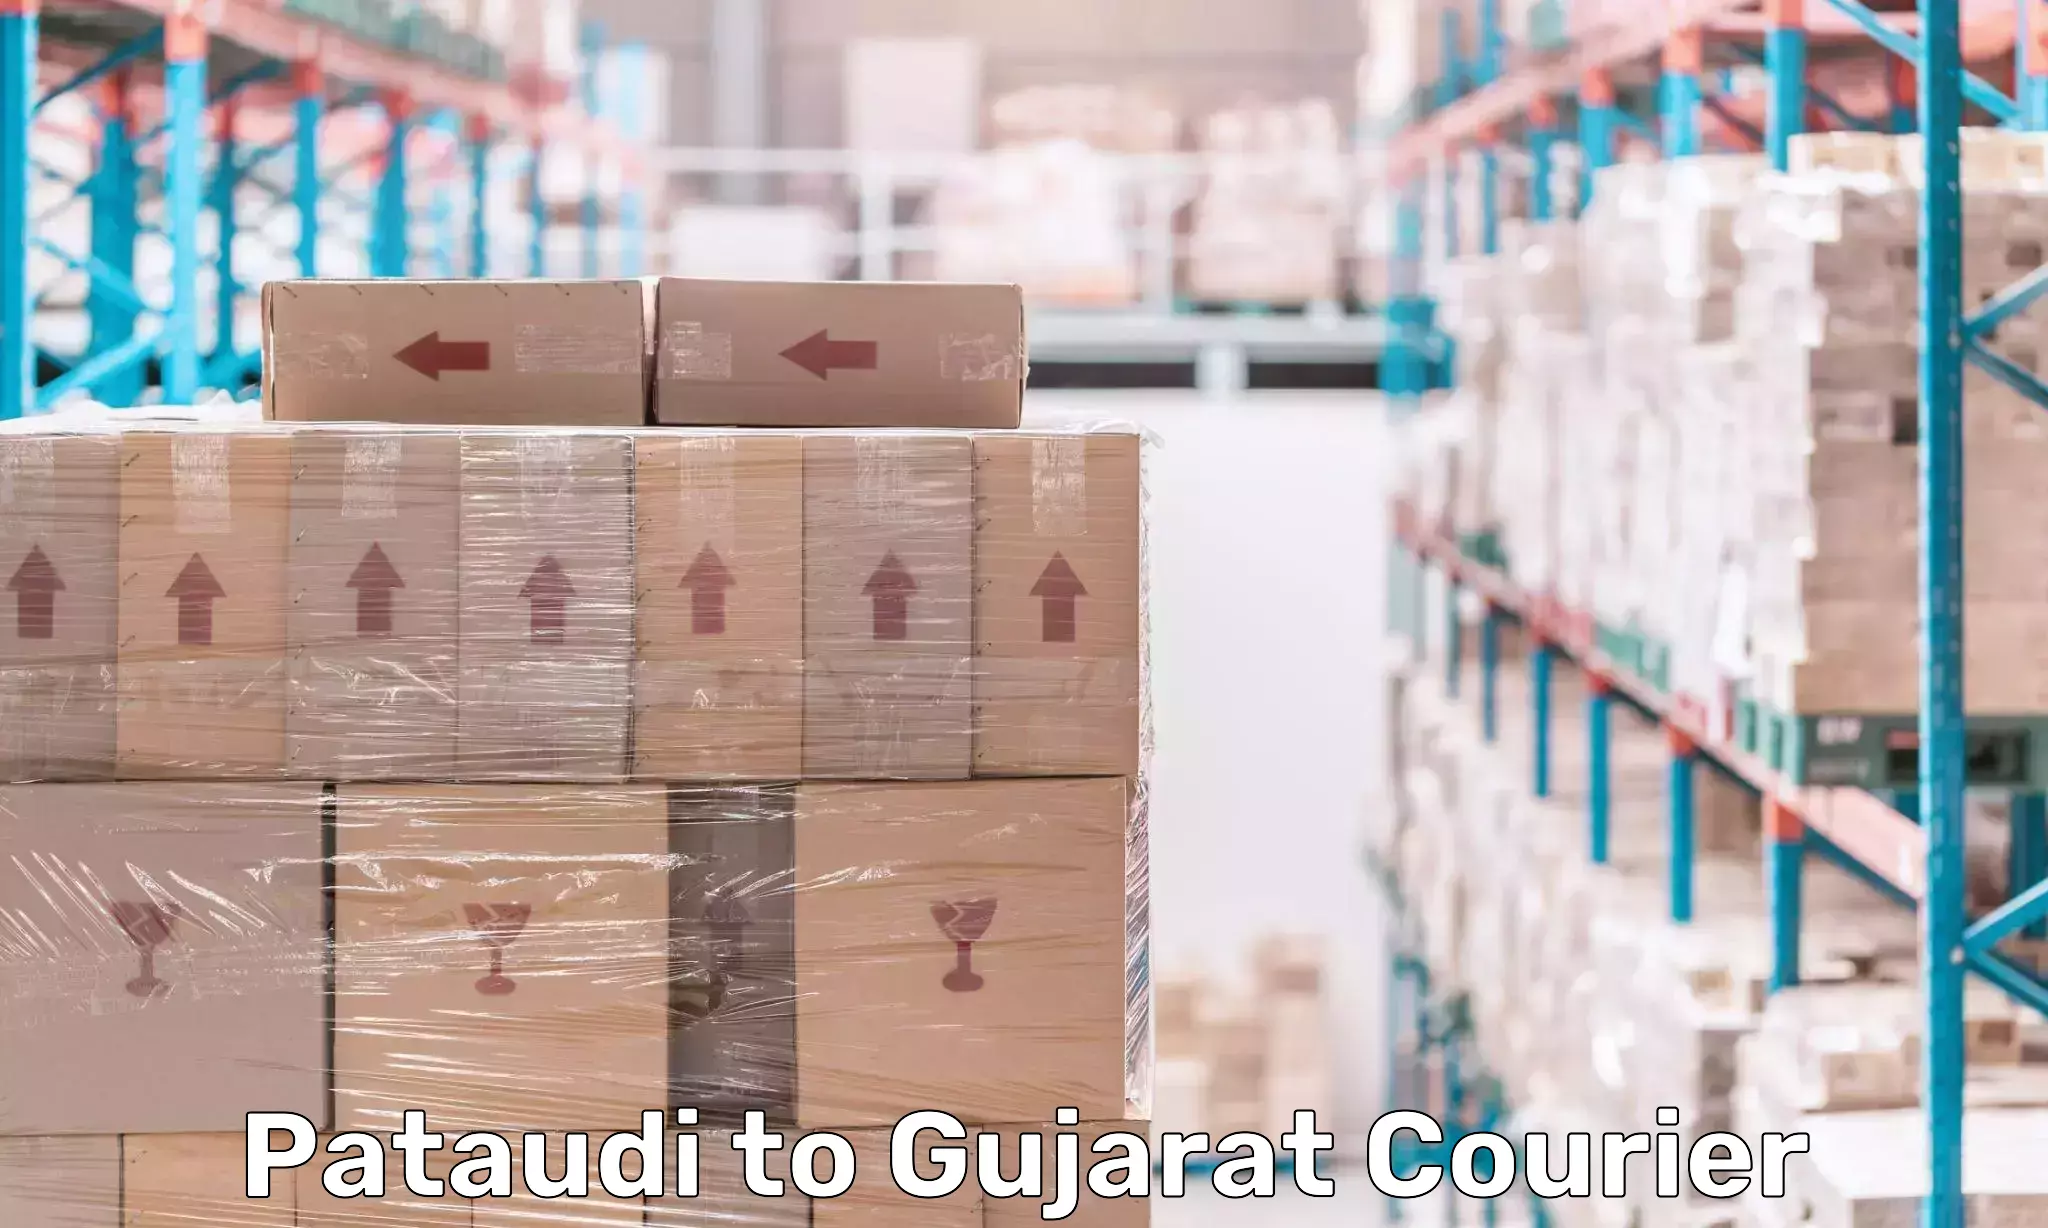 24-hour courier service Pataudi to Gujarat